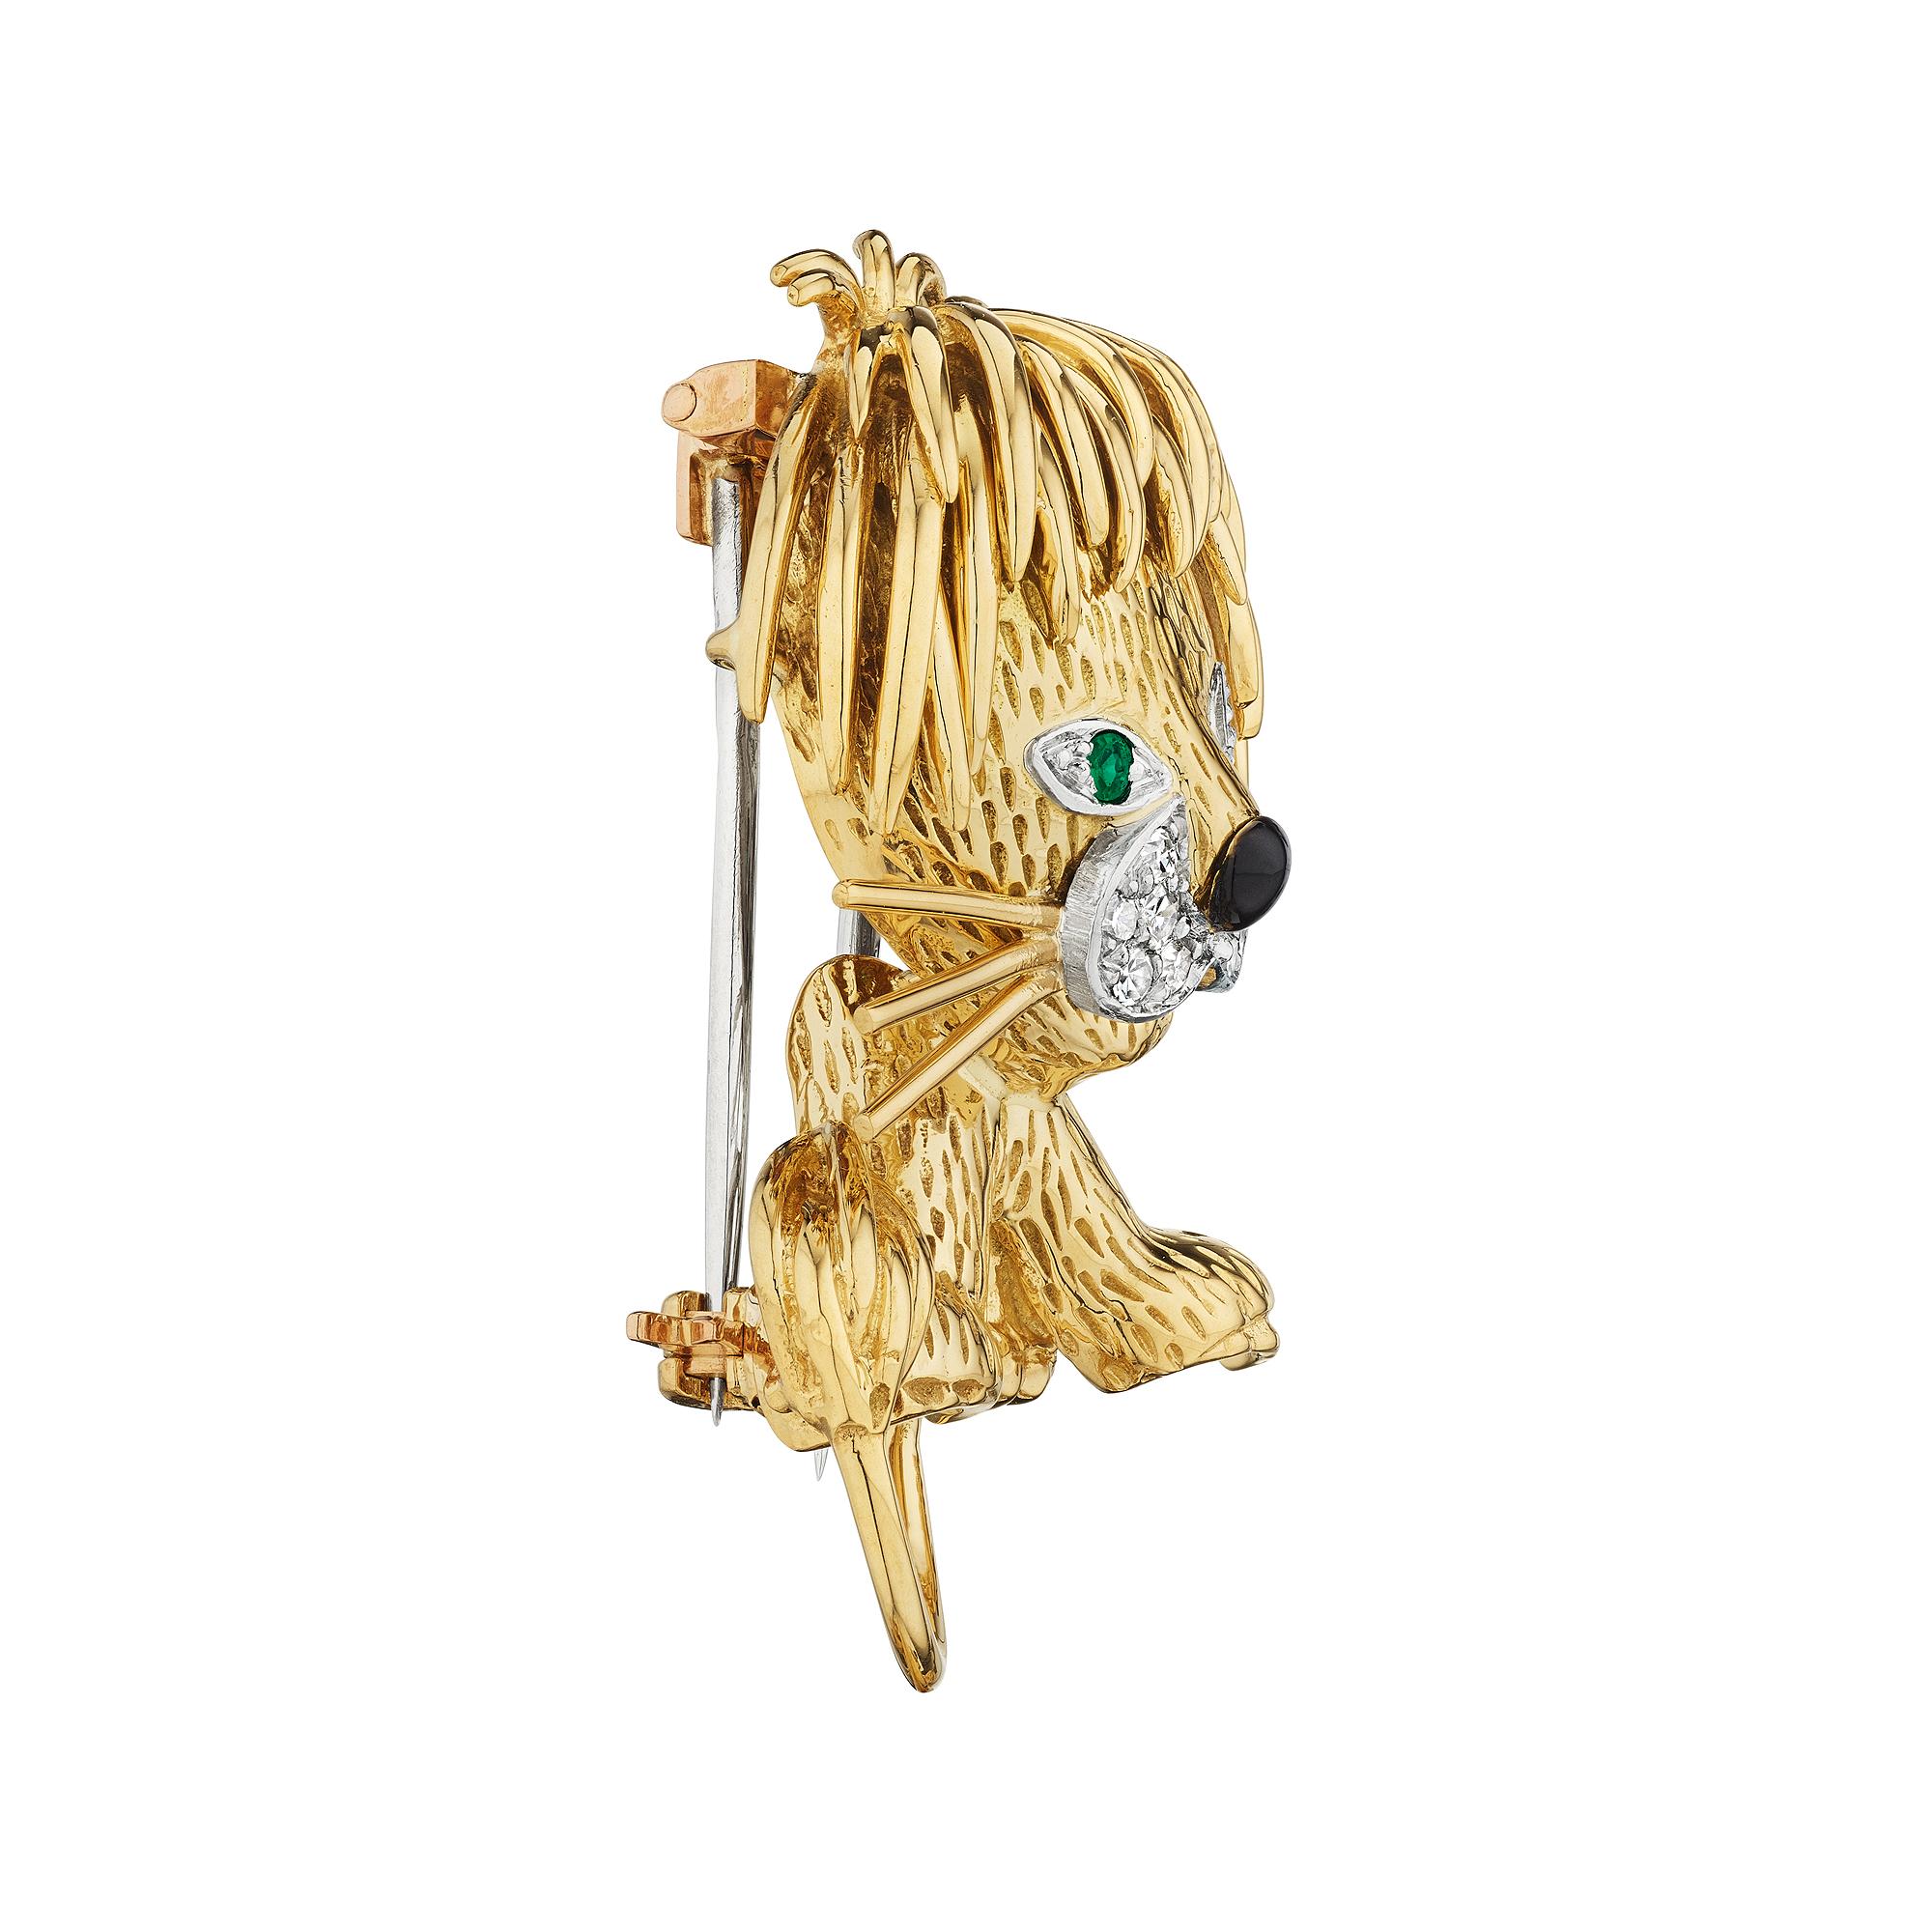 Keep your baby lion cub close to you when wearing this adorable Van Cleef & Arpels Paris vintage diamond emerald gold and platinum brooch. With its black enamel nose, emerald eyes, and diamond face, this frisky lion cub will keep you purring. Signed